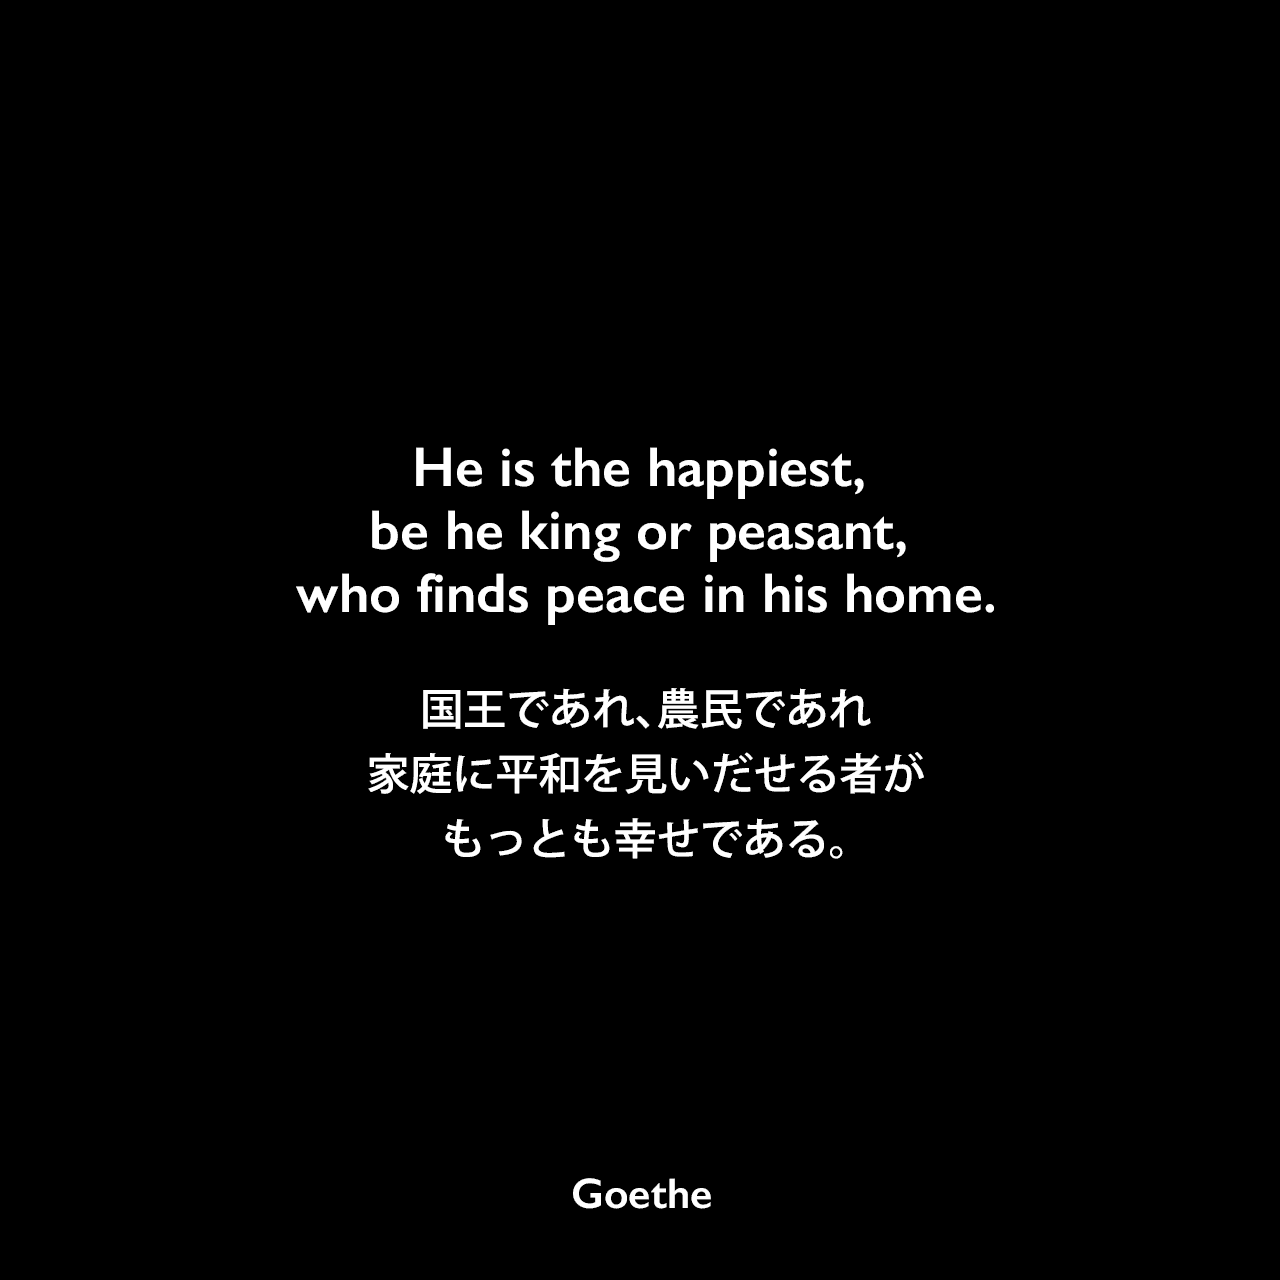 He is the happiest, be he king or peasant, who finds peace in his home.国王であれ、農民であれ、家庭に平和を見いだせる者が、もっとも幸せである。Johann Wolfgang von Goethe